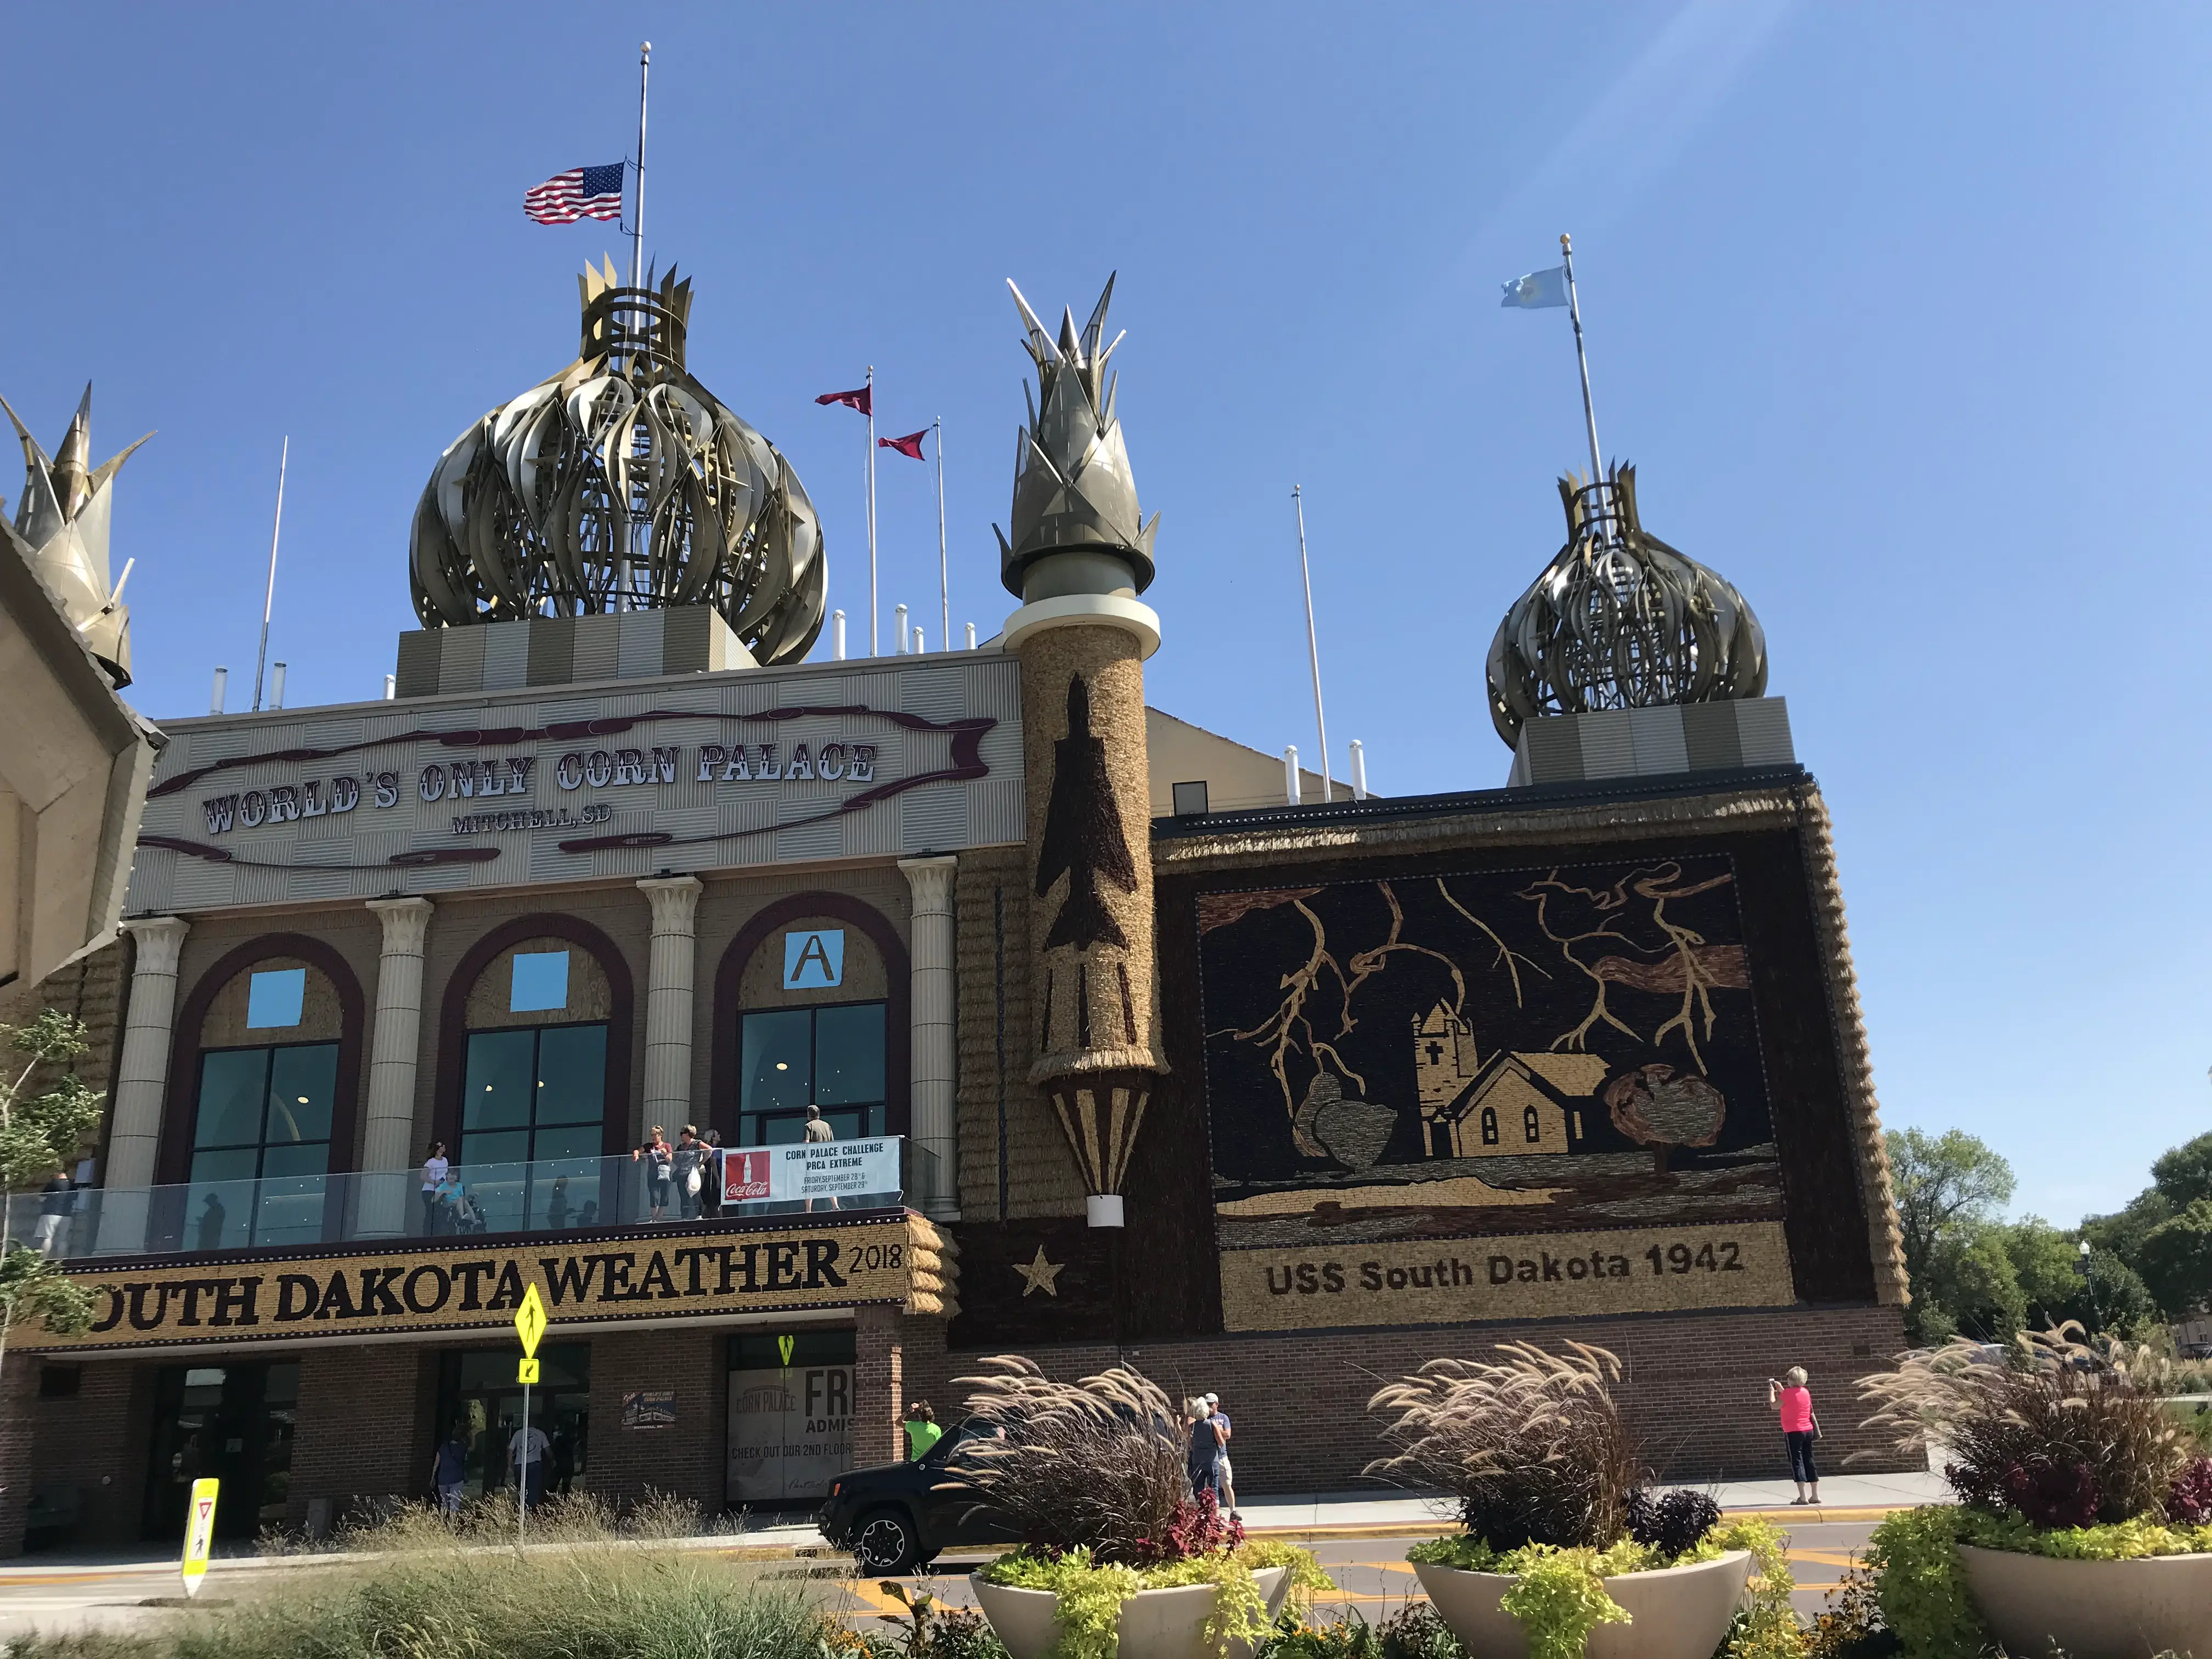 A building that looks like a palace with corn cobs coming off the top of the towers and signs that say, "South Dakota Weather", "USS South Dakota 1942" and "World's Only Corn Palace.